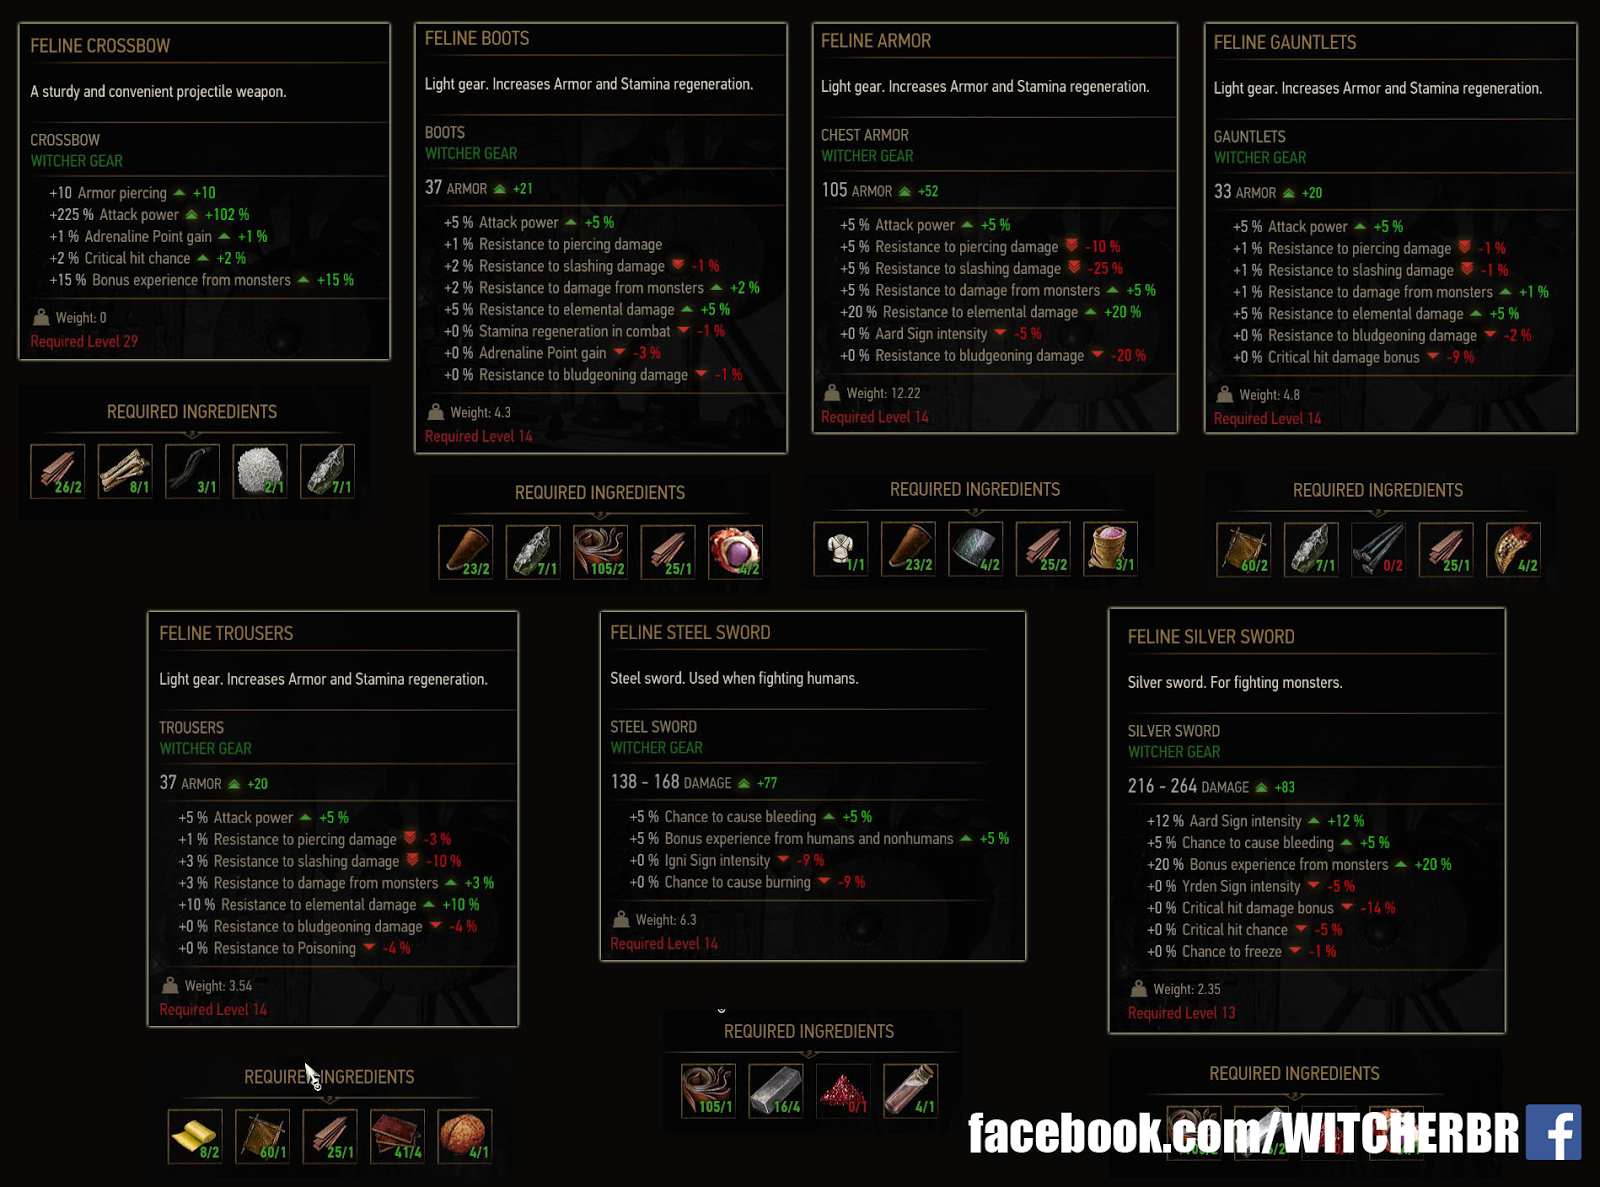 The witcher 3 witcher gear levels фото 95